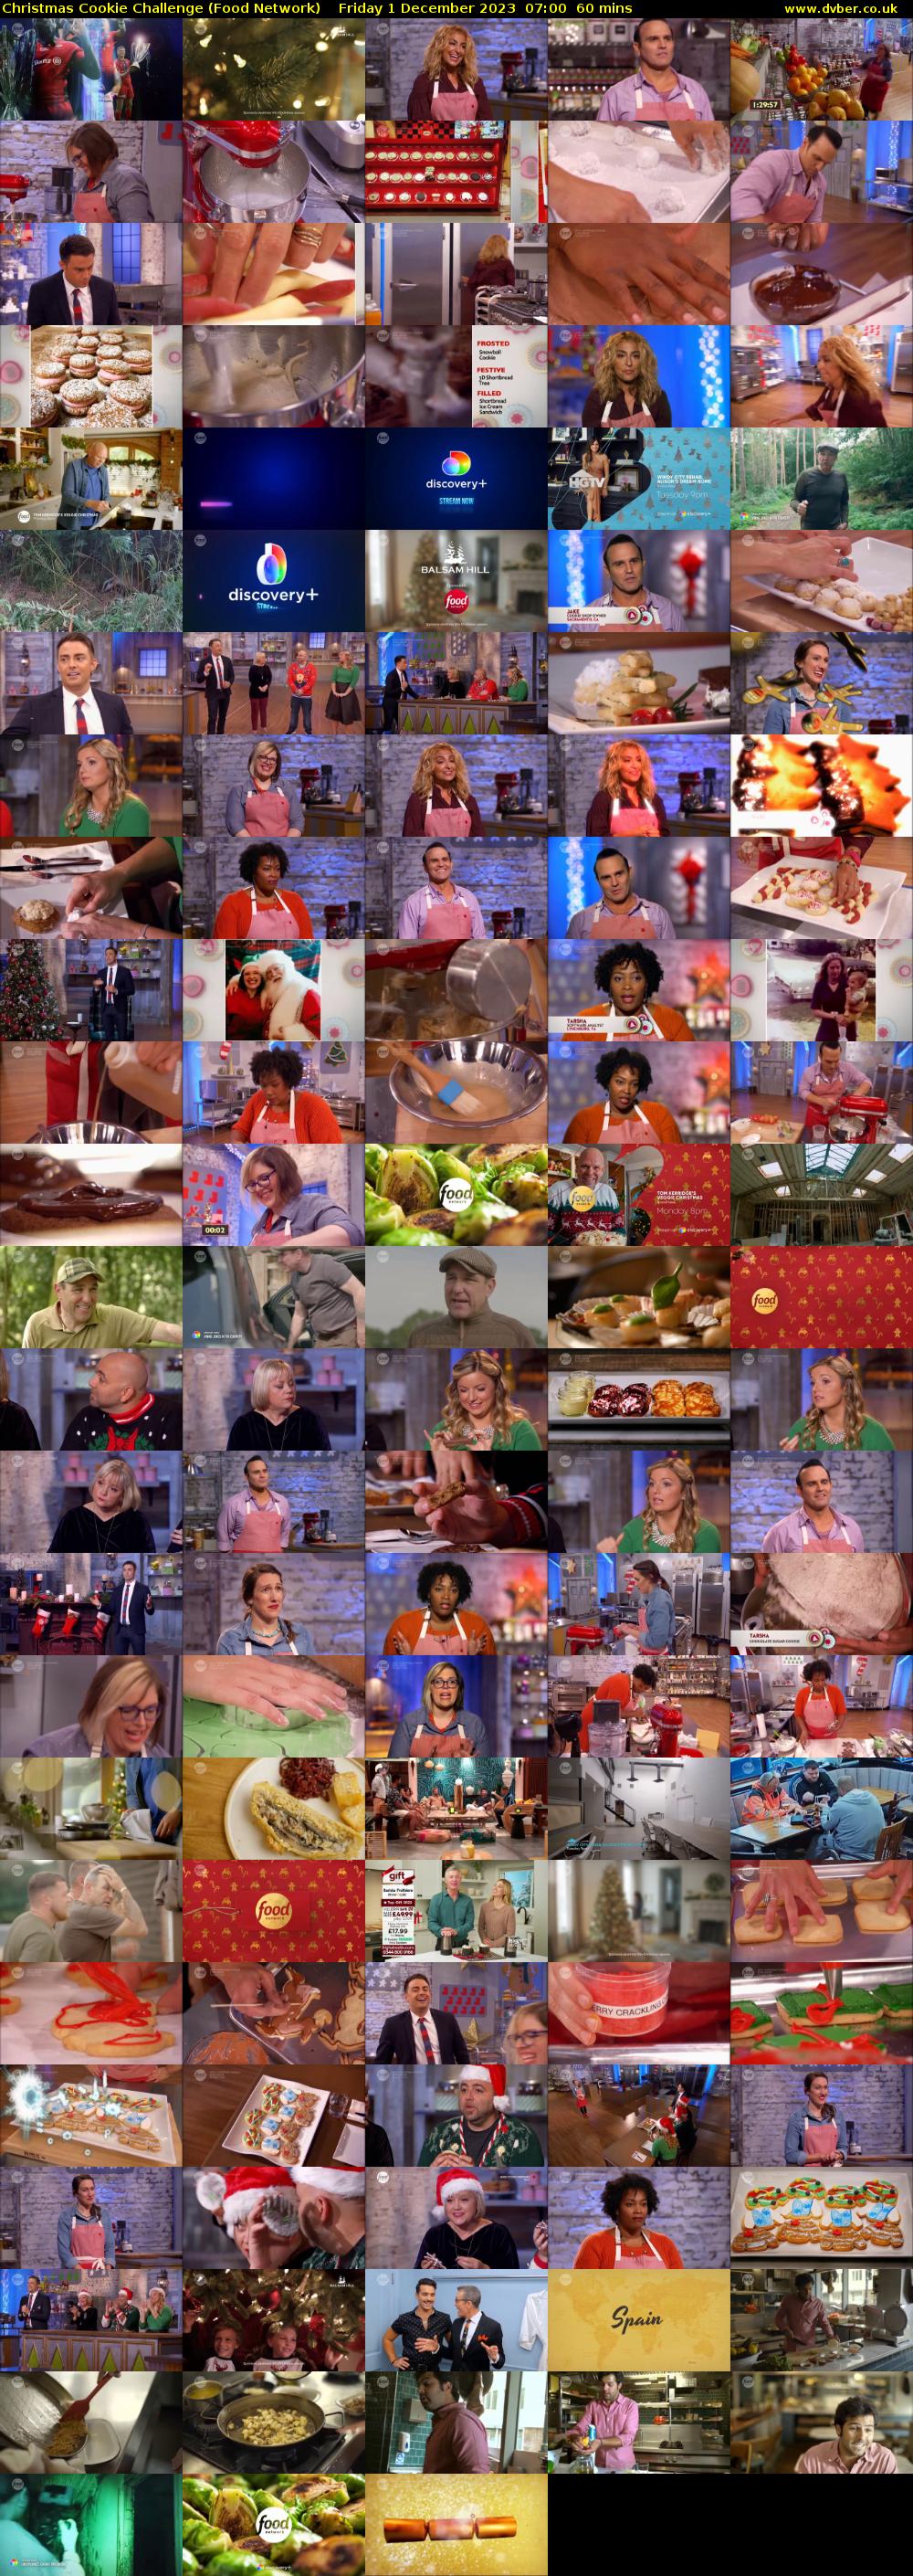 Christmas Cookie Challenge (Food Network) Friday 1 December 2023 07:00 - 08:00